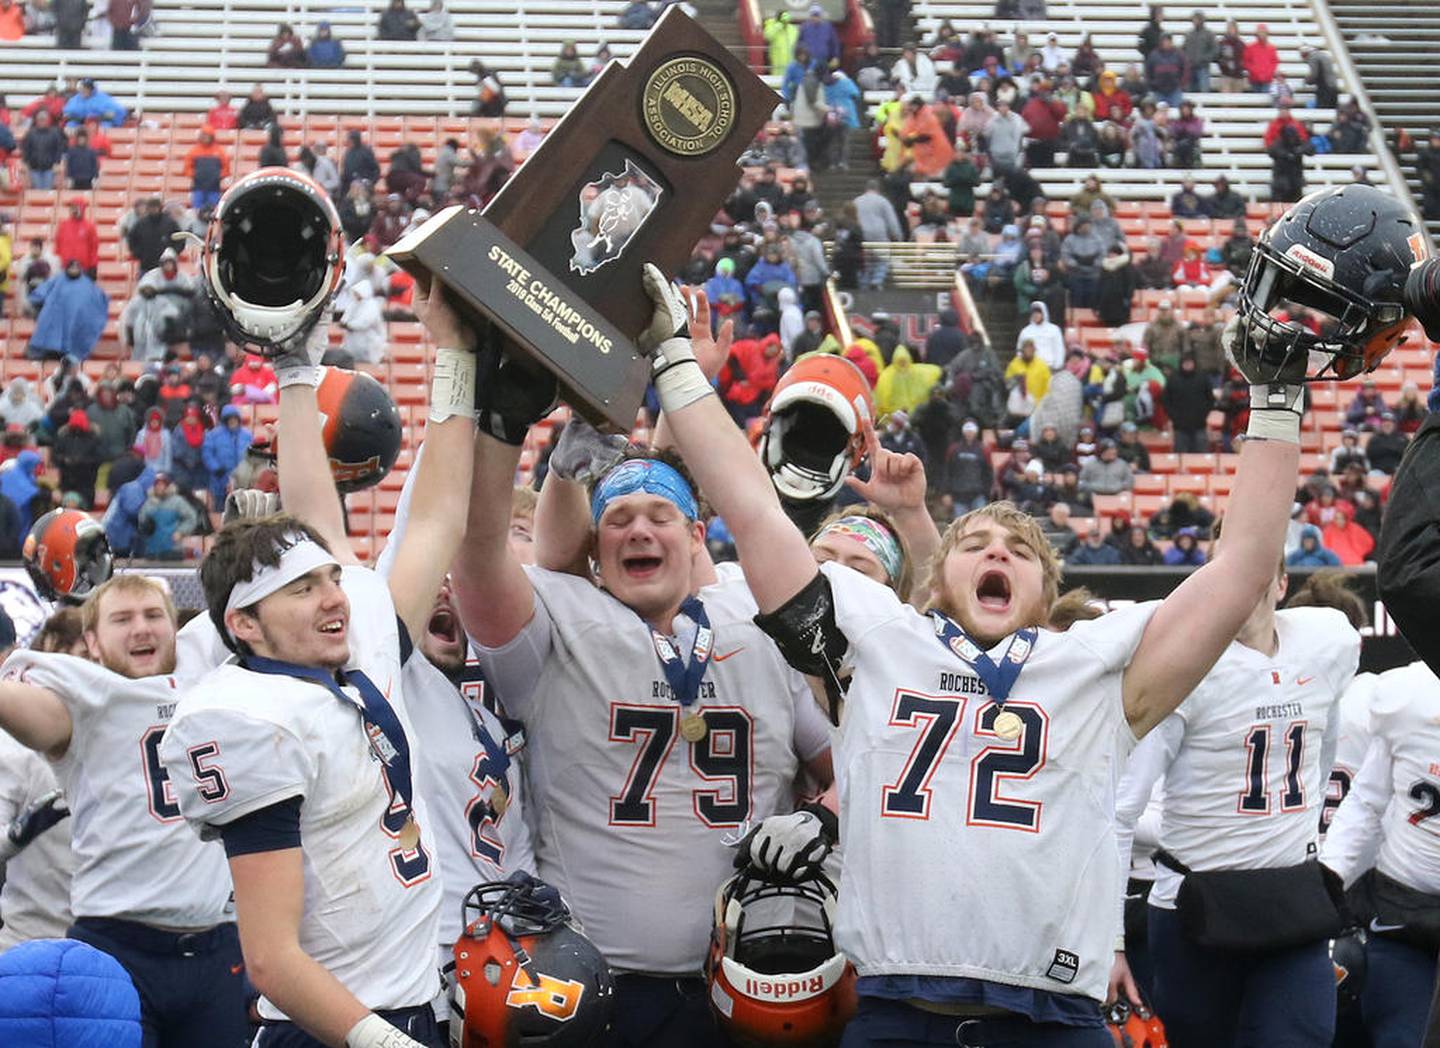 Rochester captains Clay Bruno, (left) Nathan Hoerner and Camden Ramsey (right) hoist the trophy after their Class 5A state football championship victory over St. Rita Saturday in Huskie Stadium at Northern Illinois University.